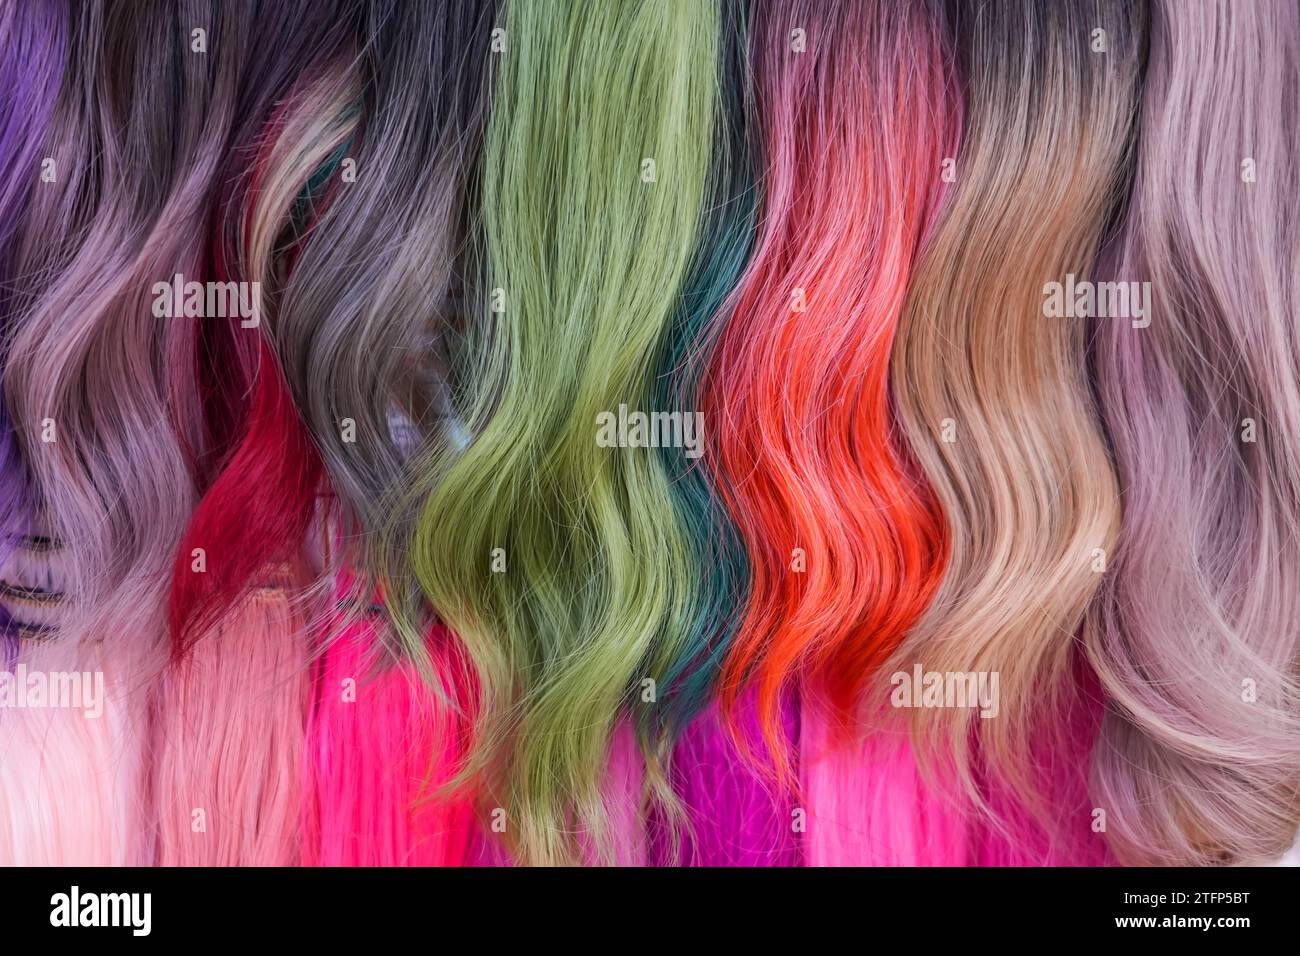 Hair samples of different colors palette. Different hair bright rich tint colors - pink, green, crimson, orange. Various hair colors set background cl Stock Photo